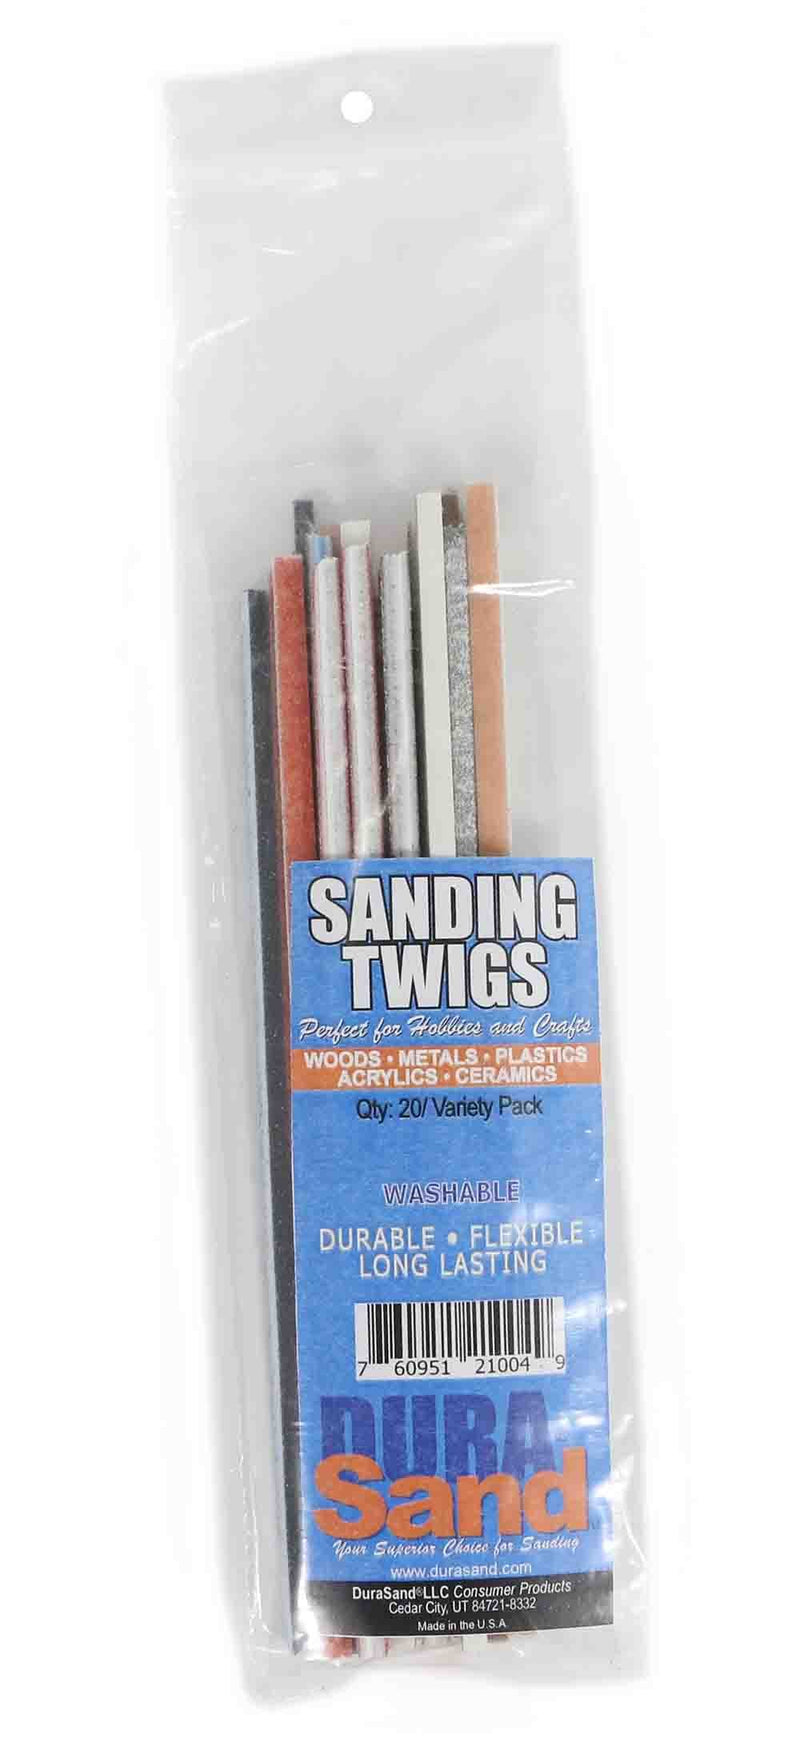 DuraSand Sanding Twigs, Hobby Craft and Models, Mixed Grit Bulk Discounts (5 Pack) Assorted 5 Pack - NewNest Australia